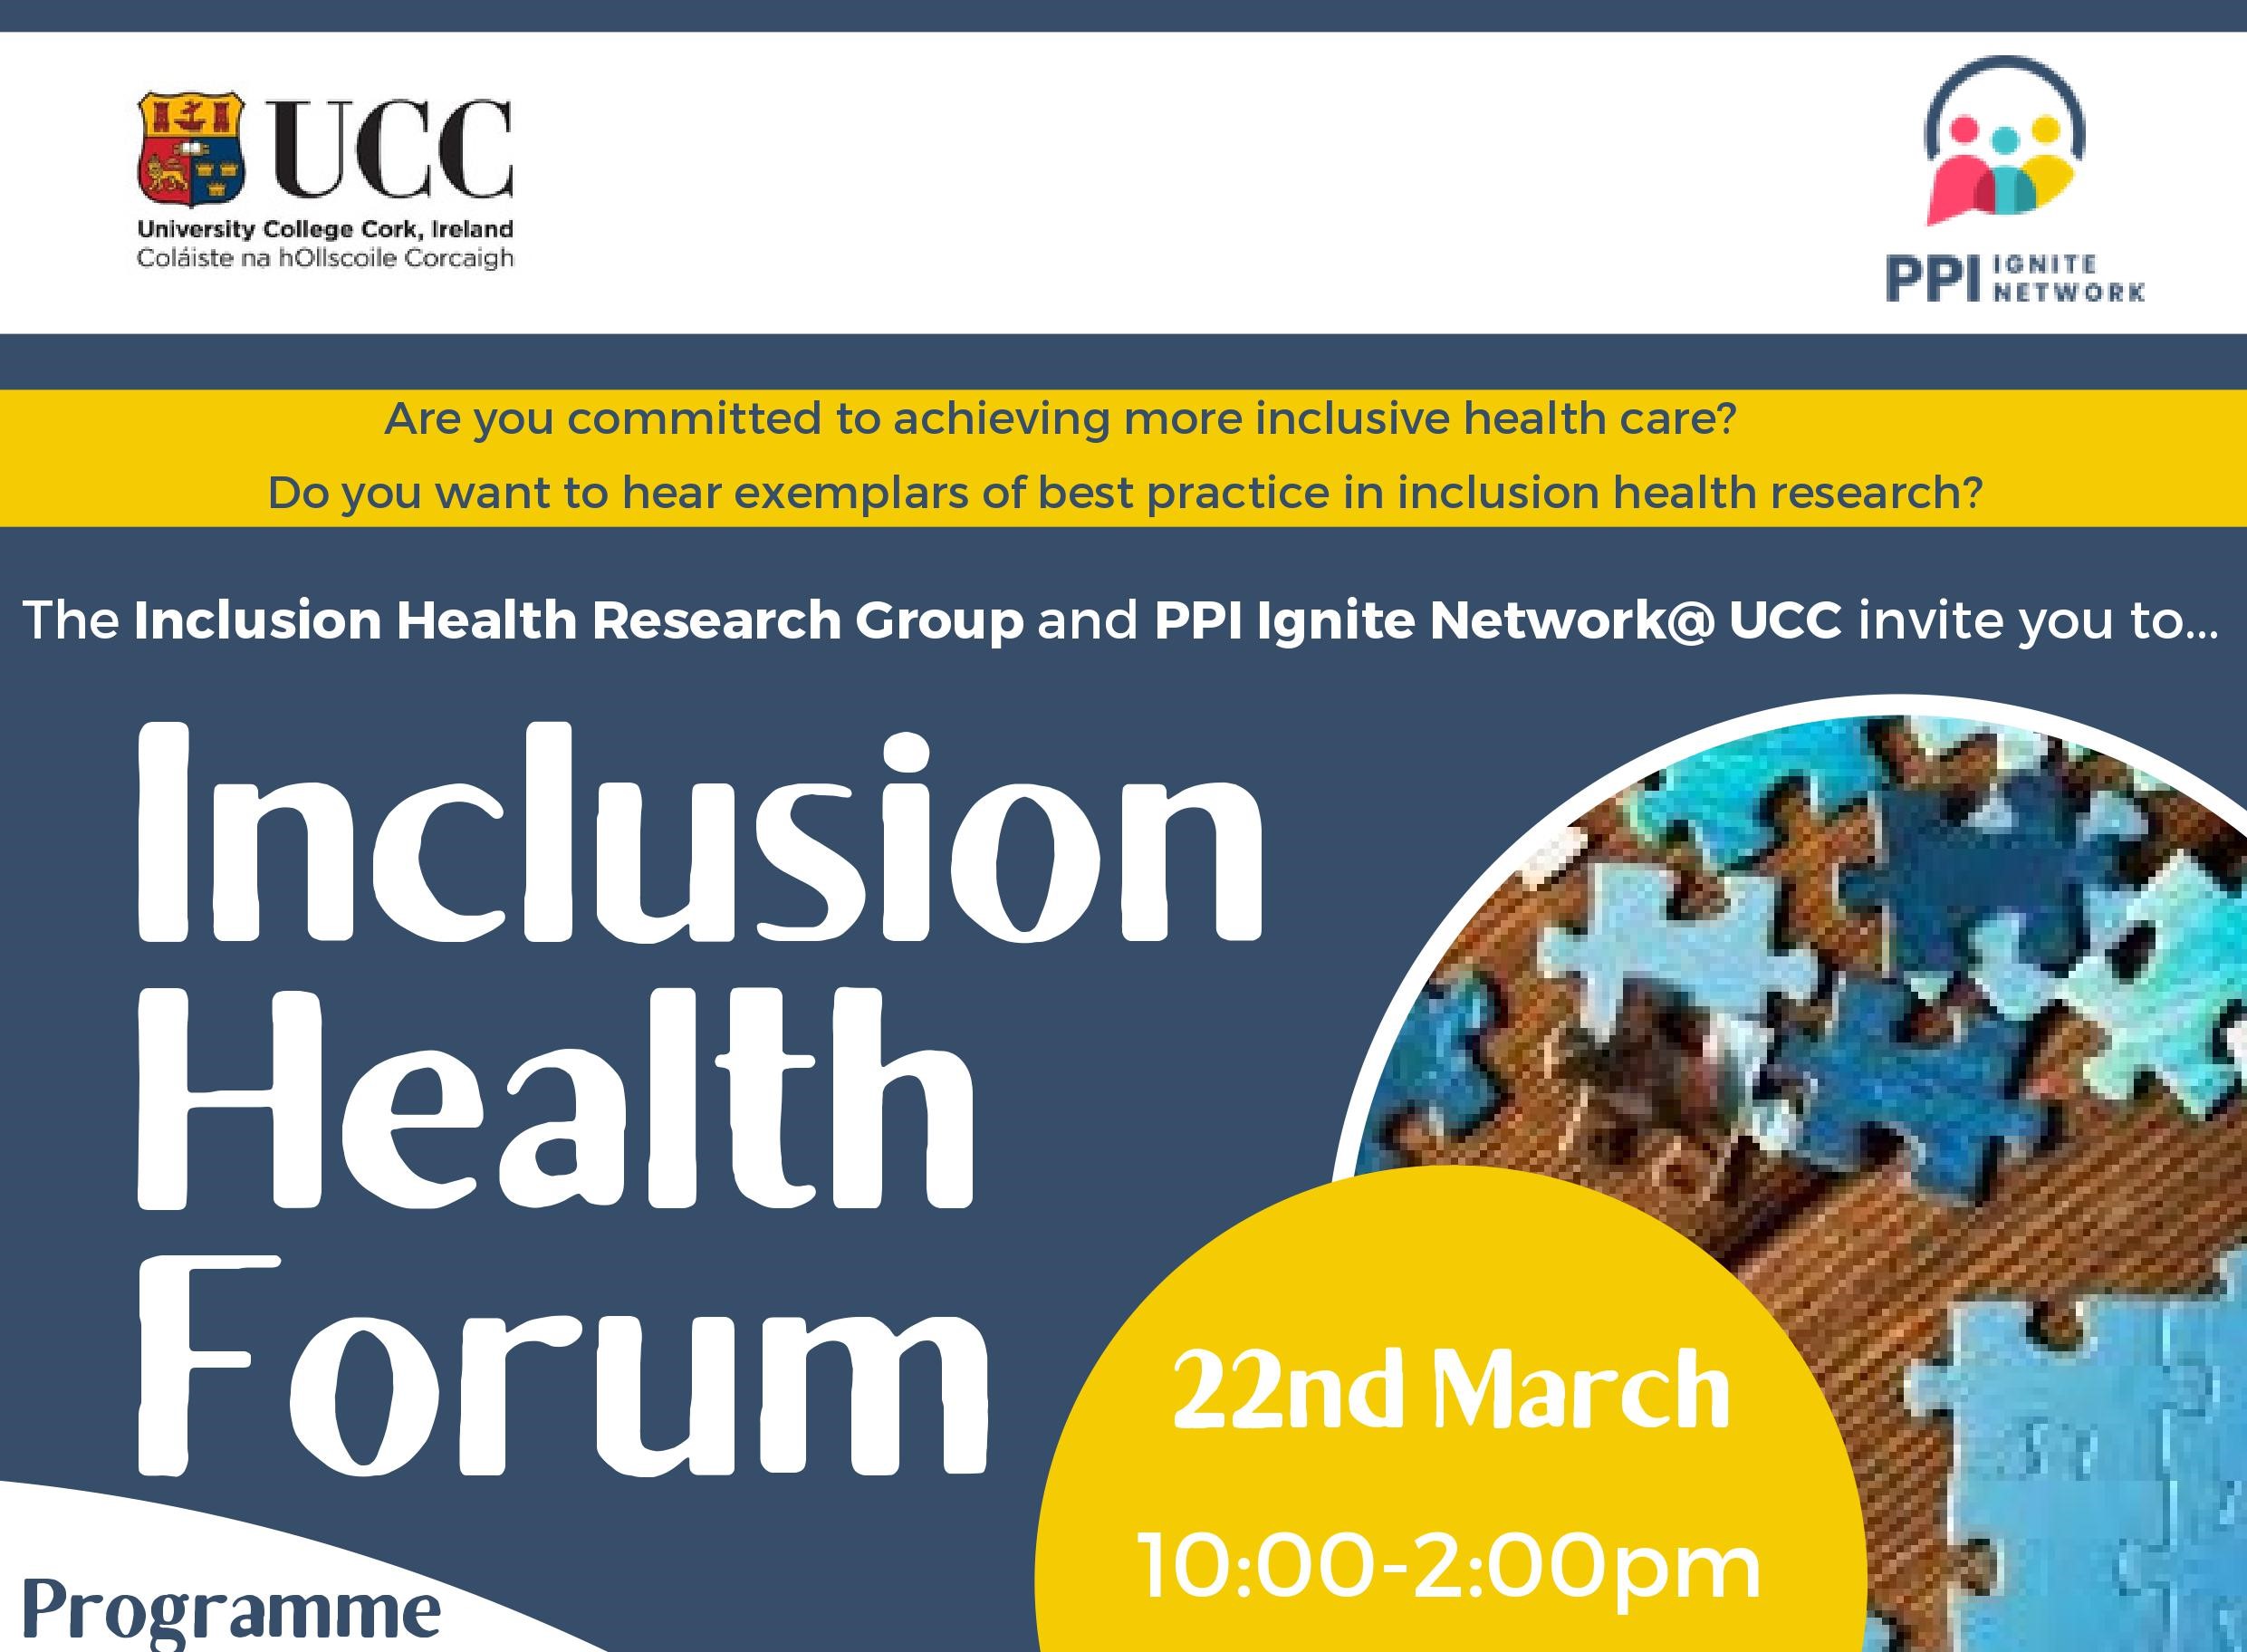 Upcoming Event: Inclusion Health Forum, 22nd March 2023.